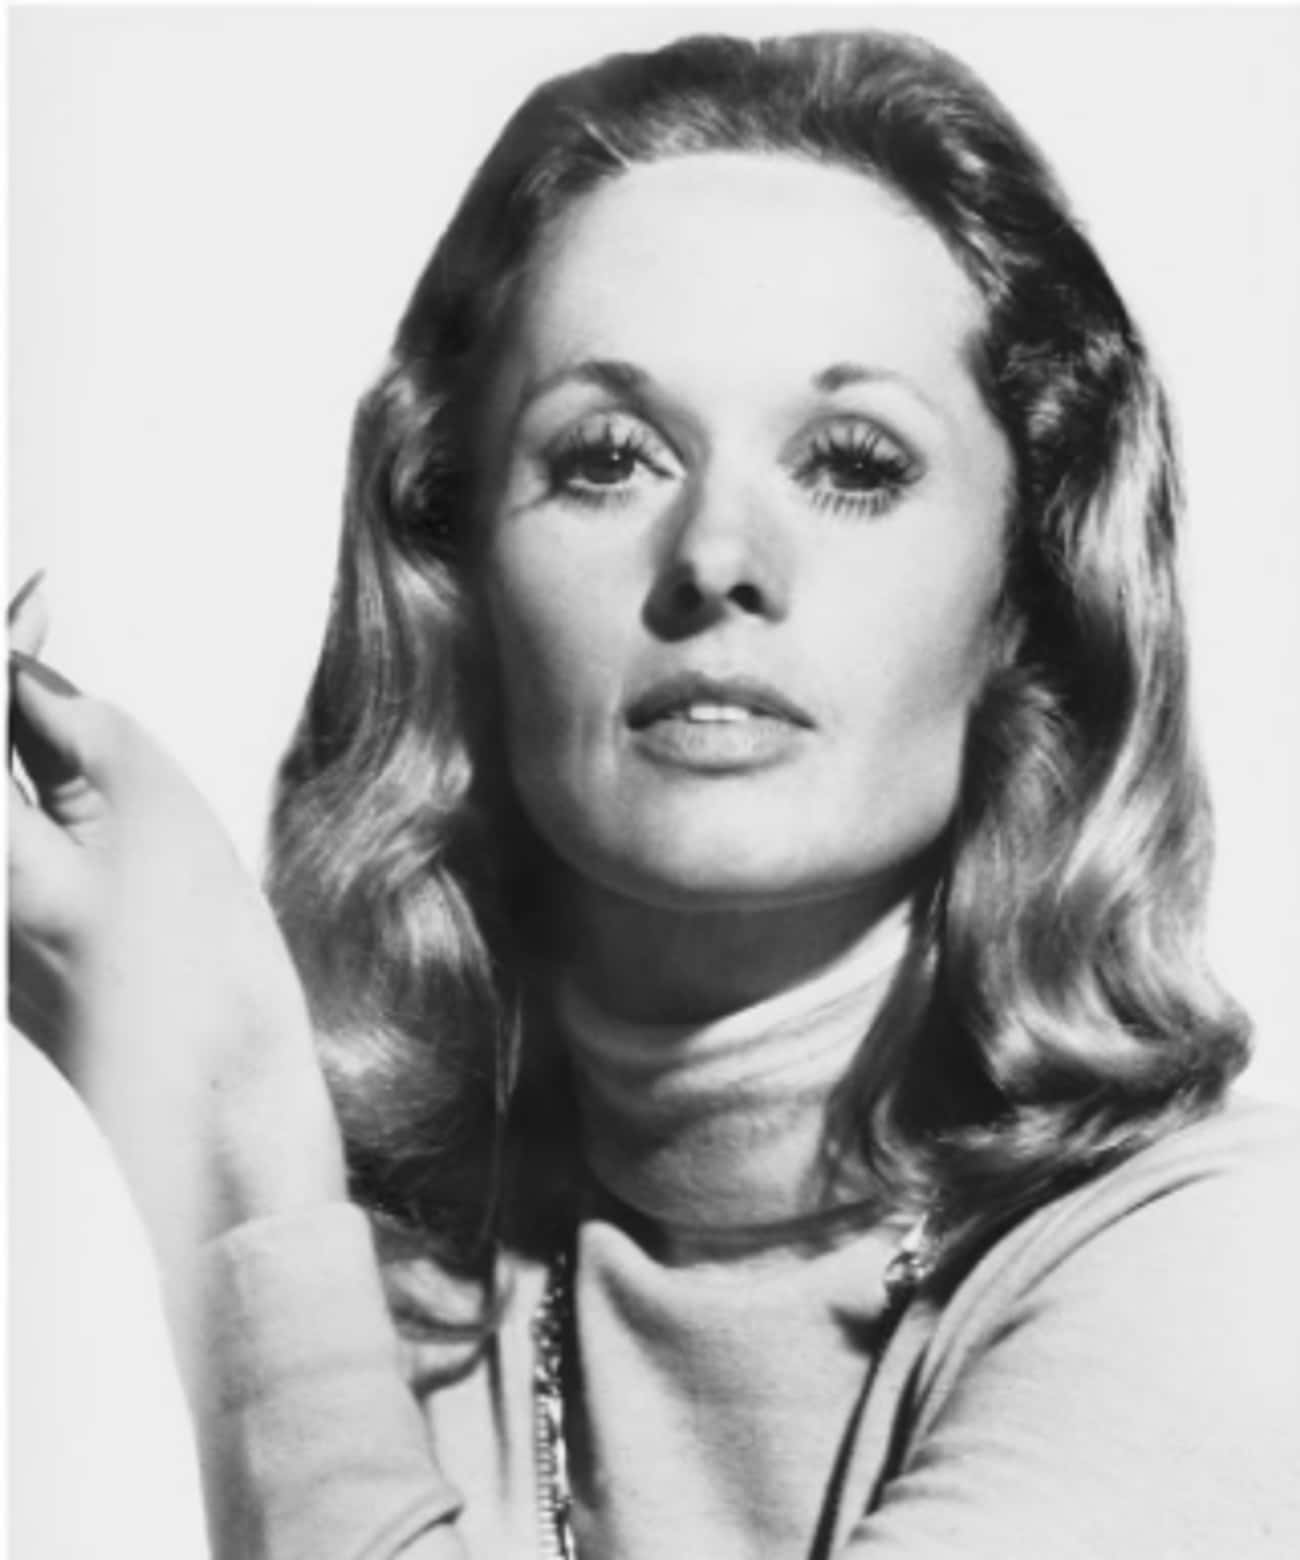 Tippi Hedren’s Professional Relationship With Alfred Hitchcock Began With Him Accusing Her Of Being A Prostitute